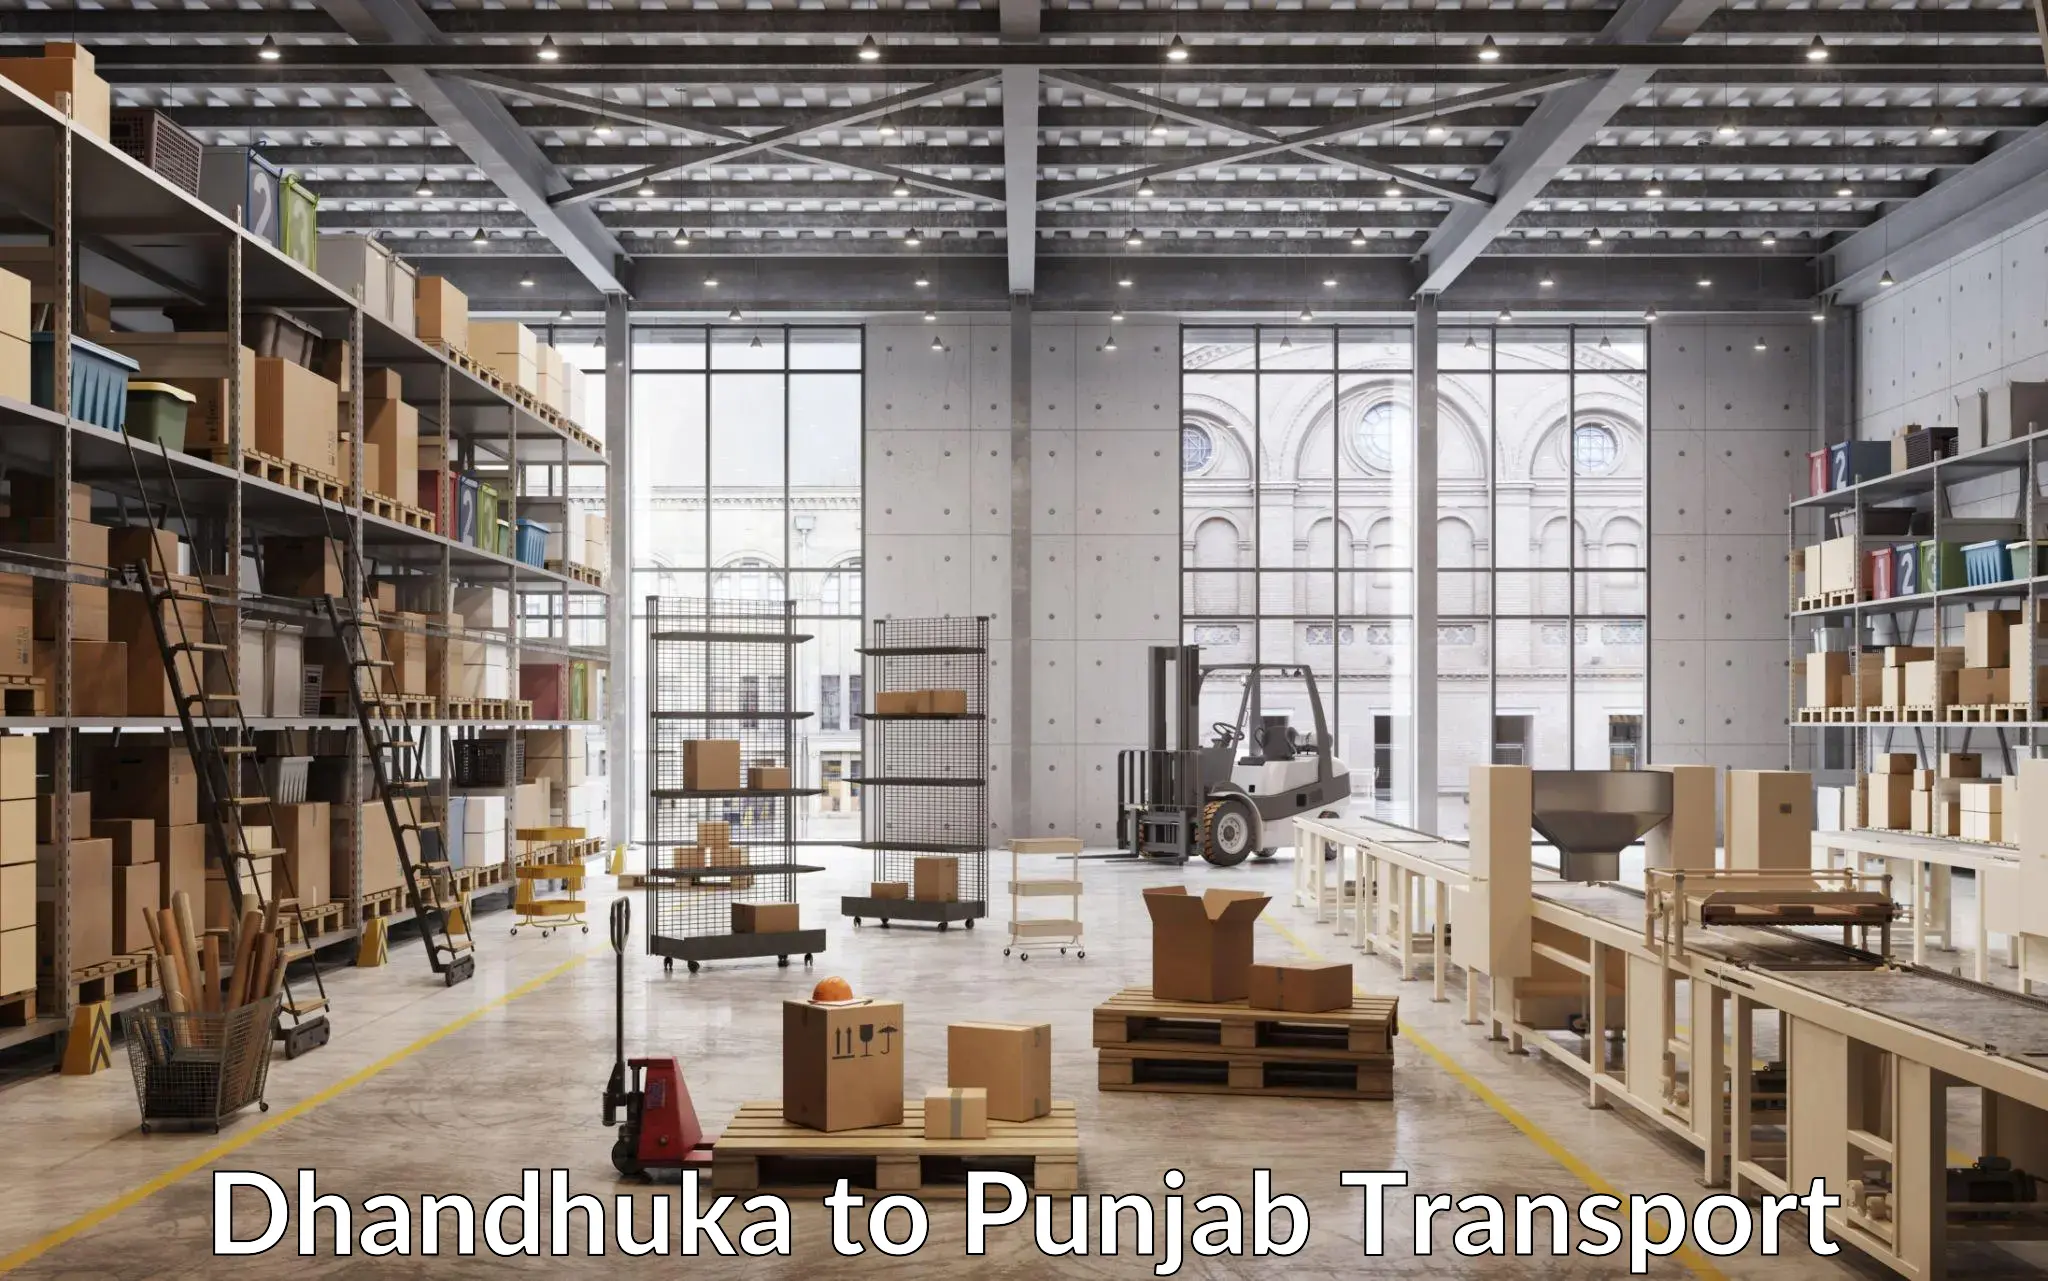 Truck transport companies in India in Dhandhuka to Mehta Chowk